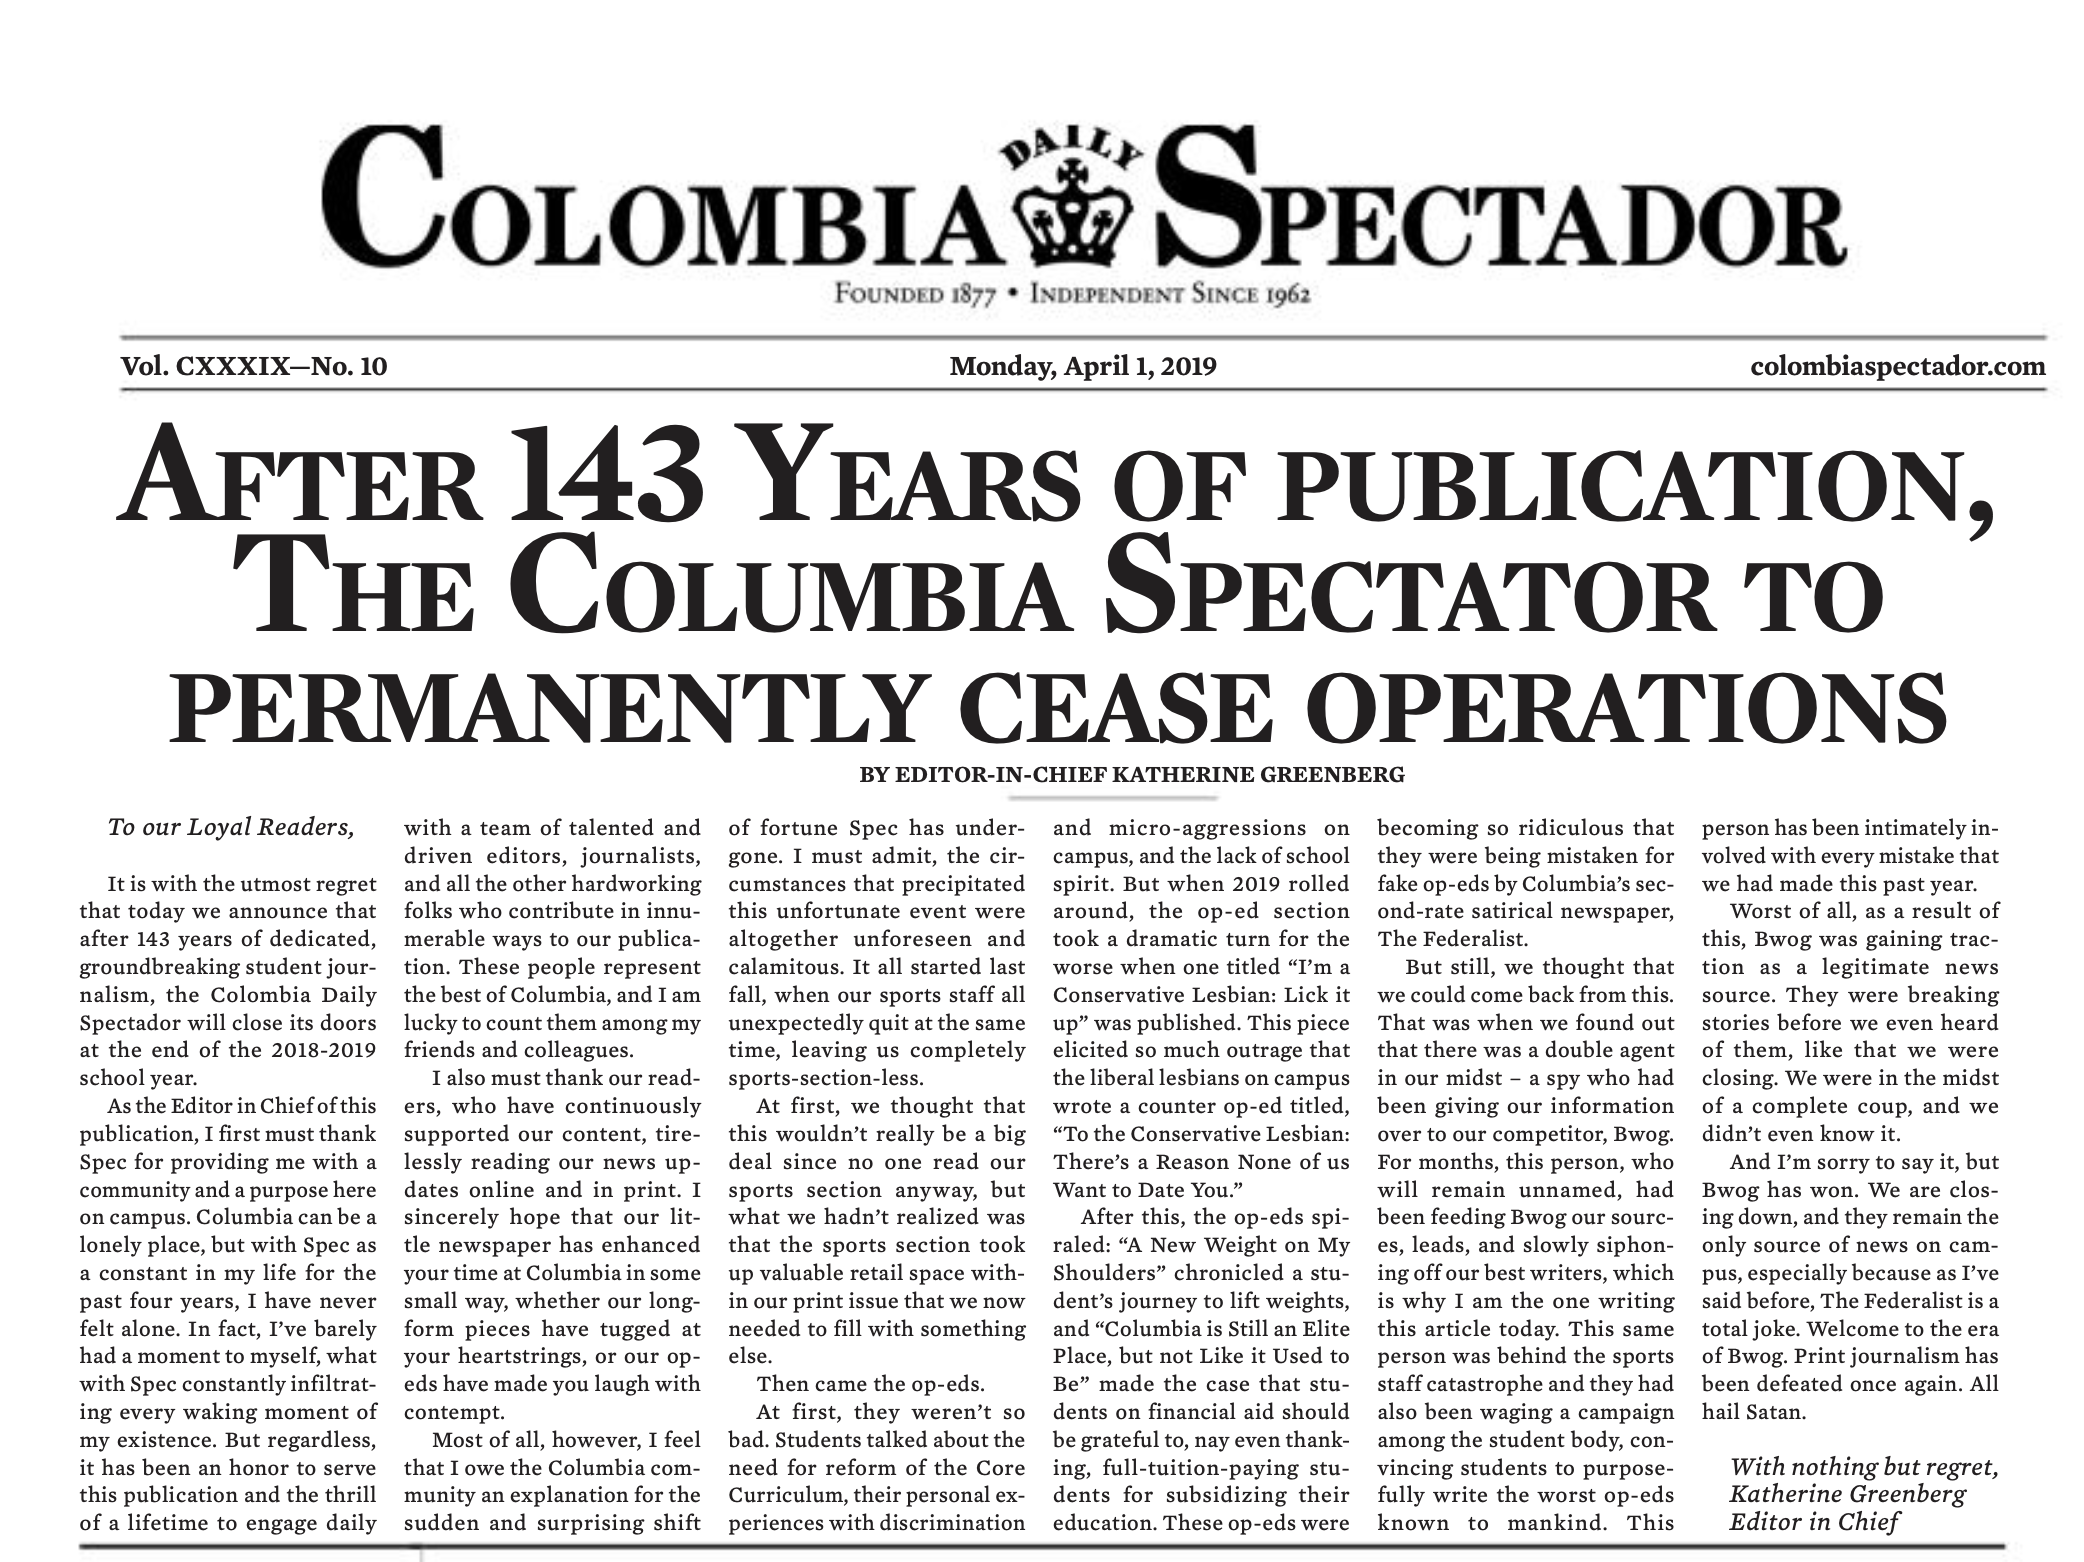 The 2019 Colombia Daily Spectador